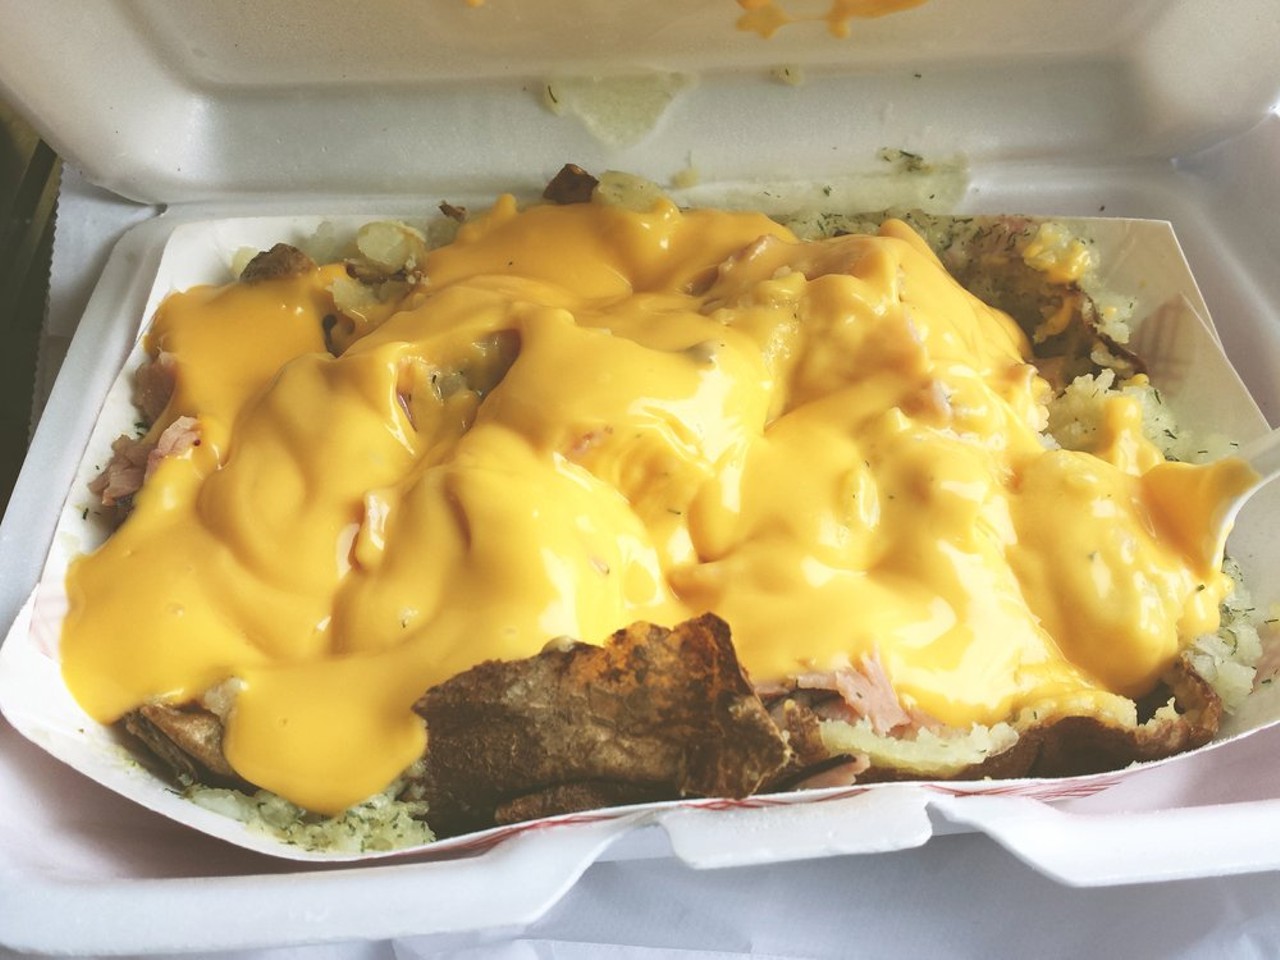 Potato Place
Detroit | 107 W Warren Ave | (313) 833-8948 
This small eatery is known for its gigantic-sized baked potatoes, stuffed with your choice of veggies, cheese and meats like steak, Italian sausage and ham. (Photo via Morgan H., Yelp)